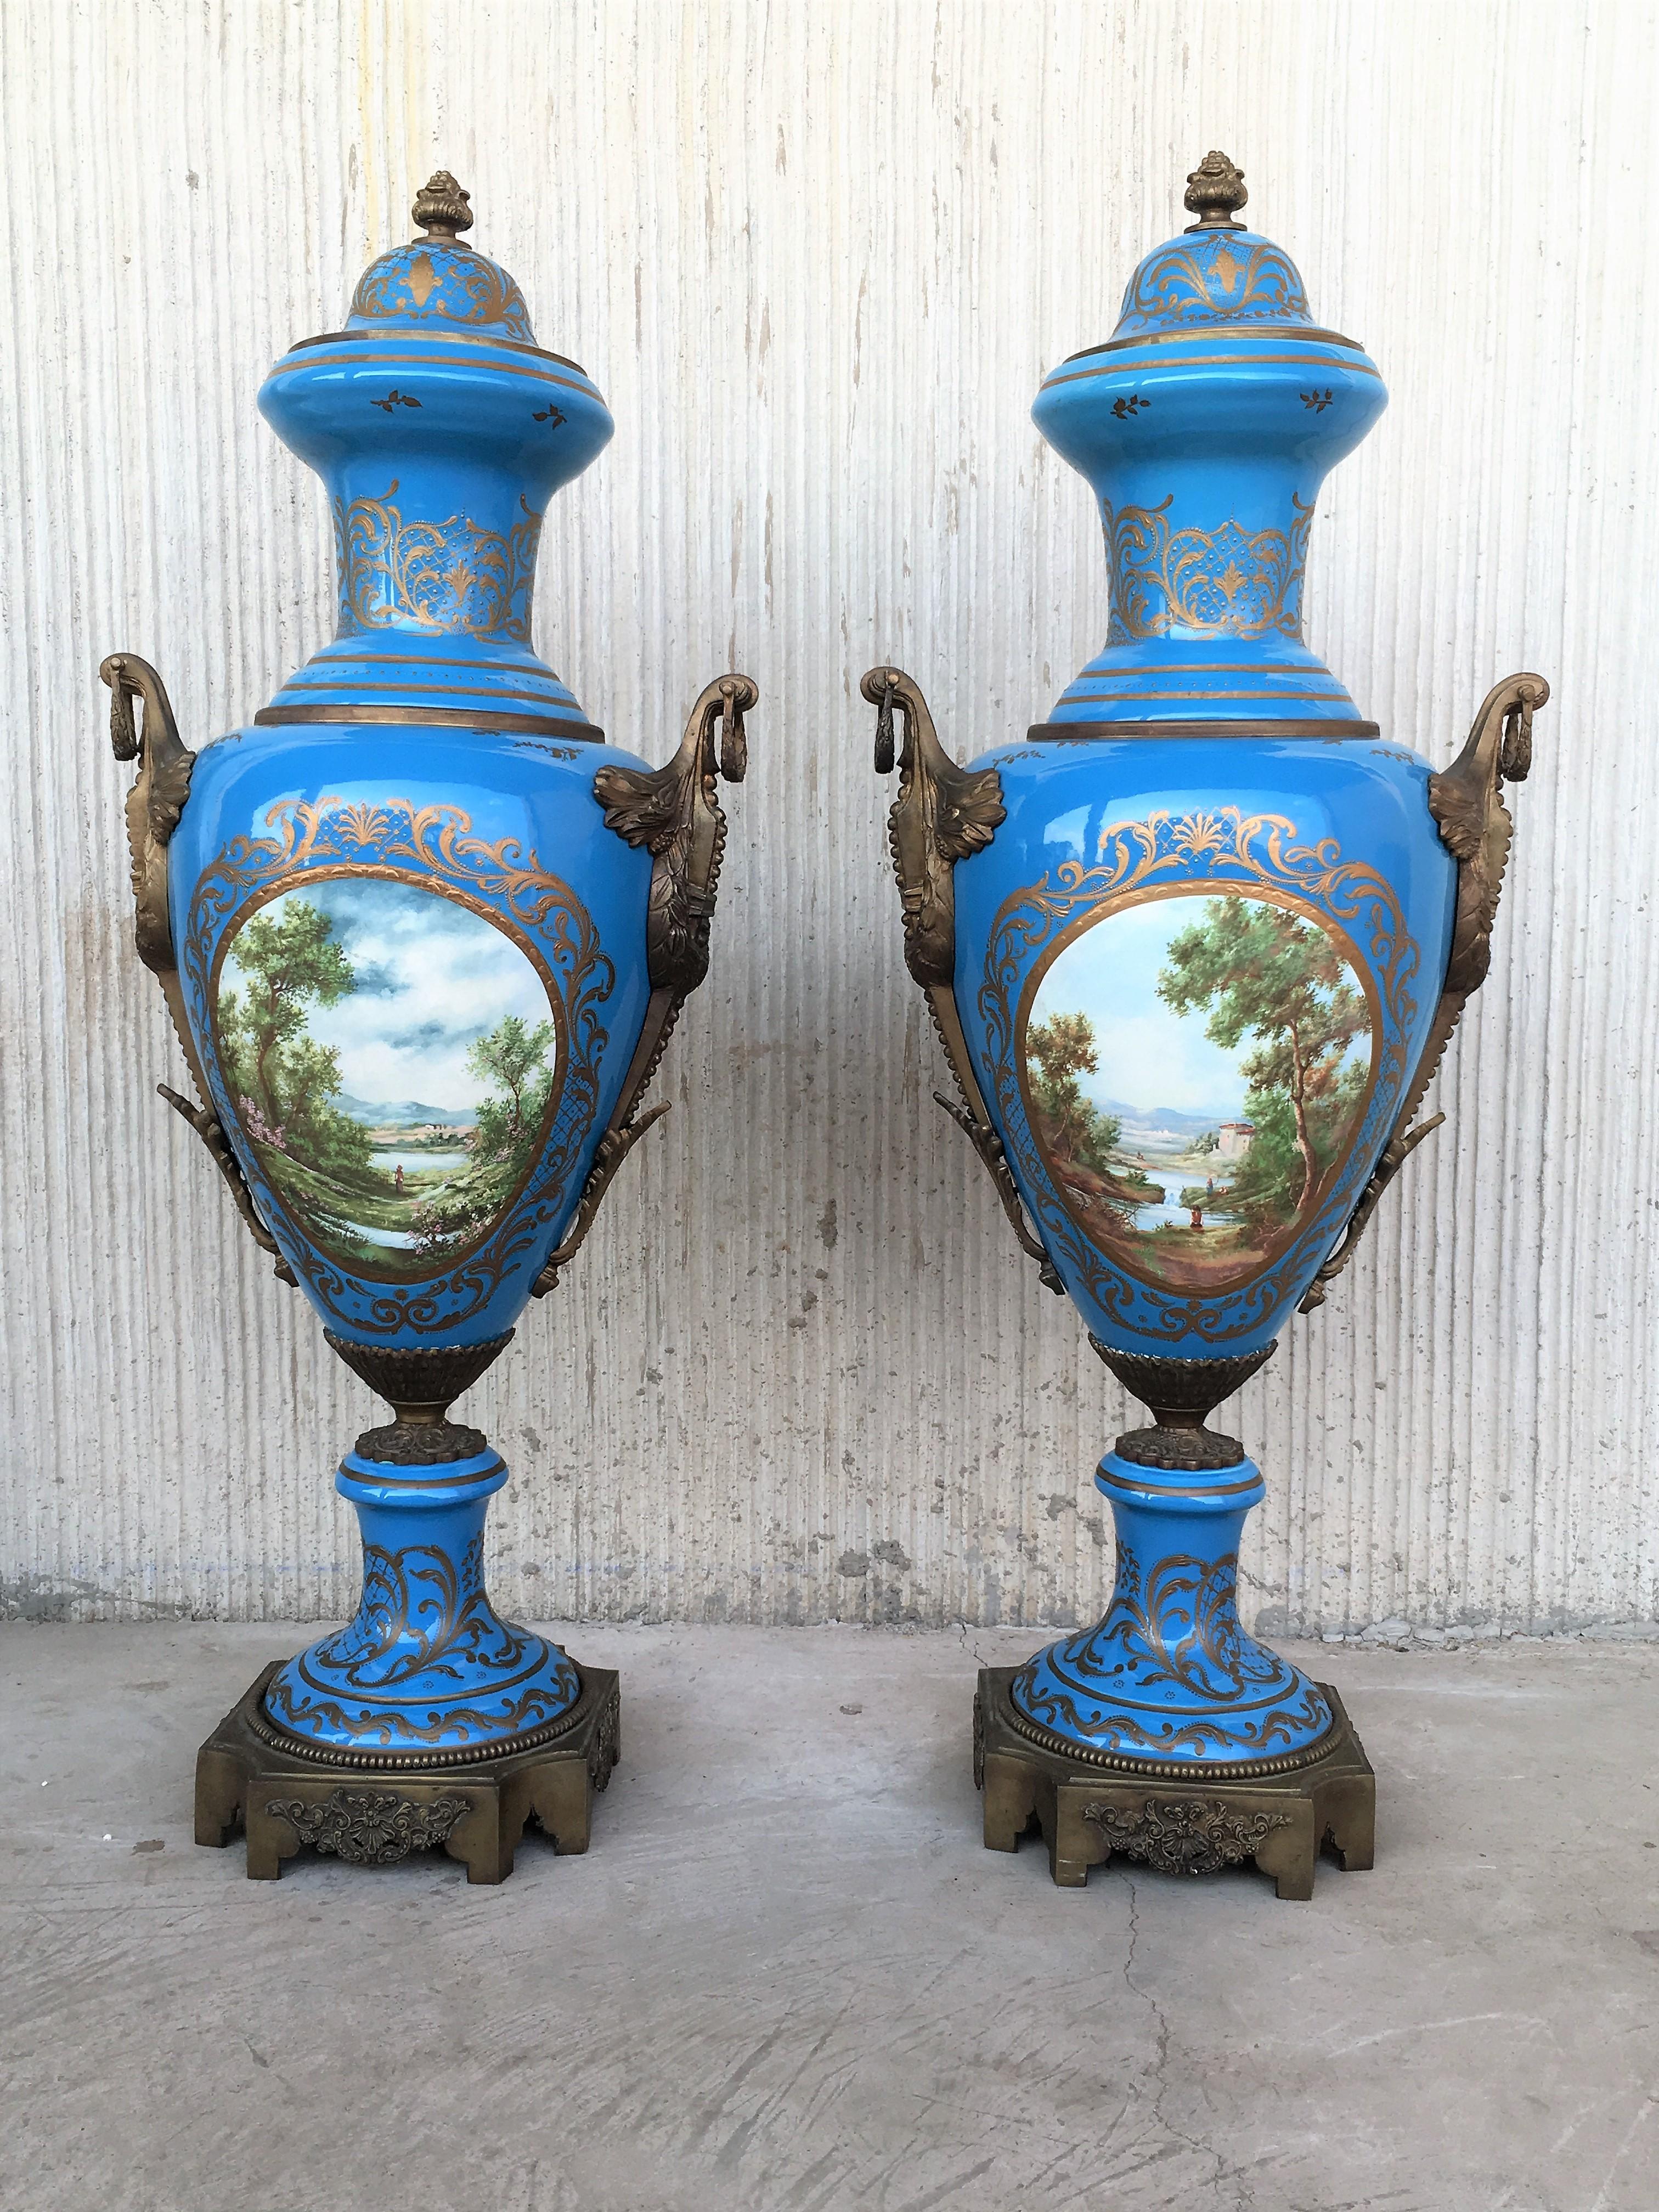 A pair of large 19th century French Sevres ormolu-mounted and painted vases.

Each in baluster form with large ormolu mounts. The body finely painted depicting a typical landscape. The reverse painted with religious and mythological scenes